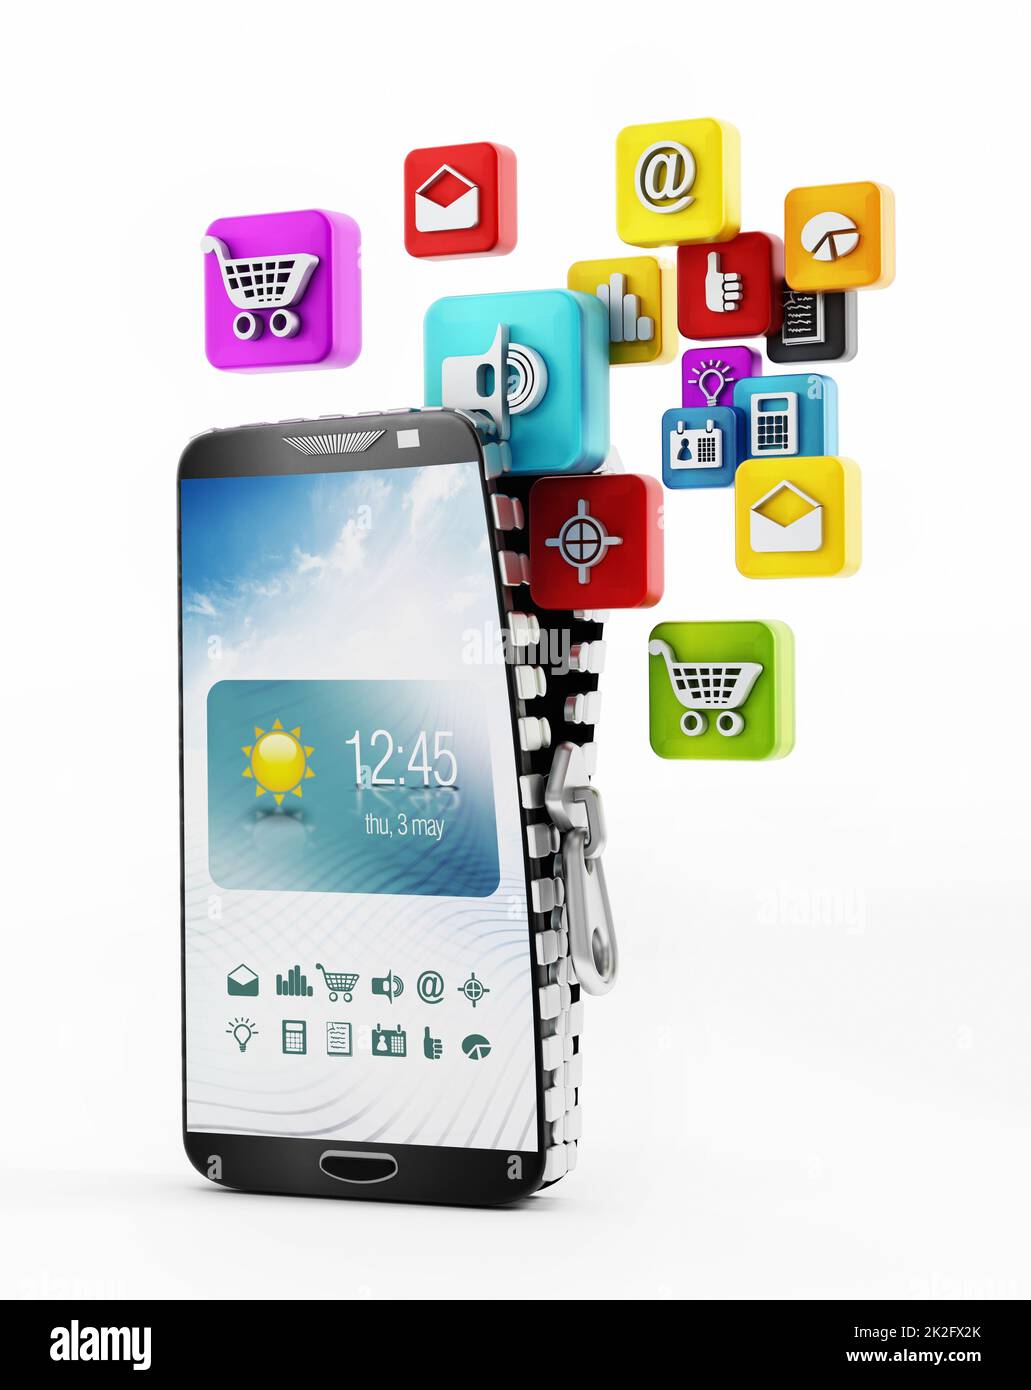 Applications downloading in smartphone Stock Photo